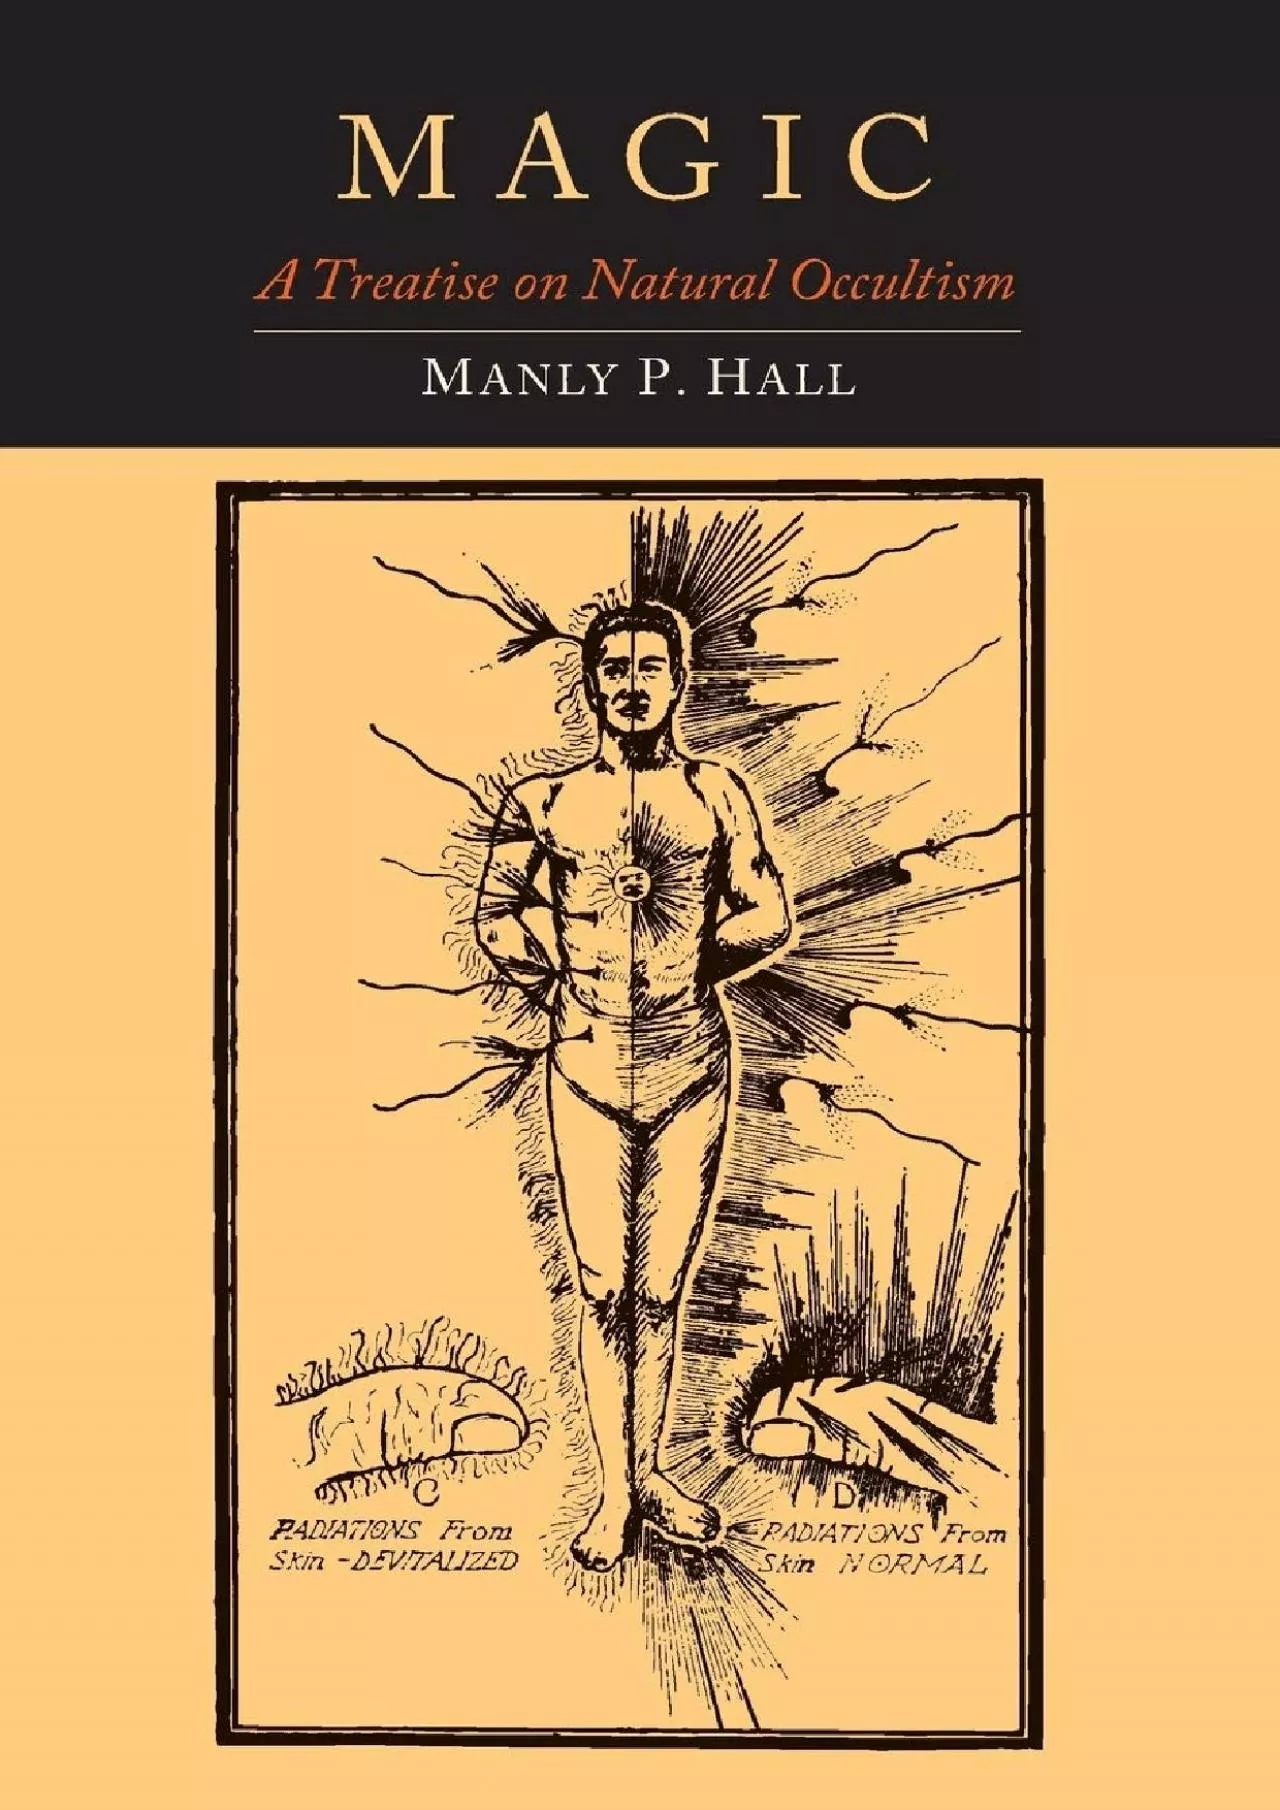 (DOWNLOAD)-Magic: A Treatise on Natural Occultism